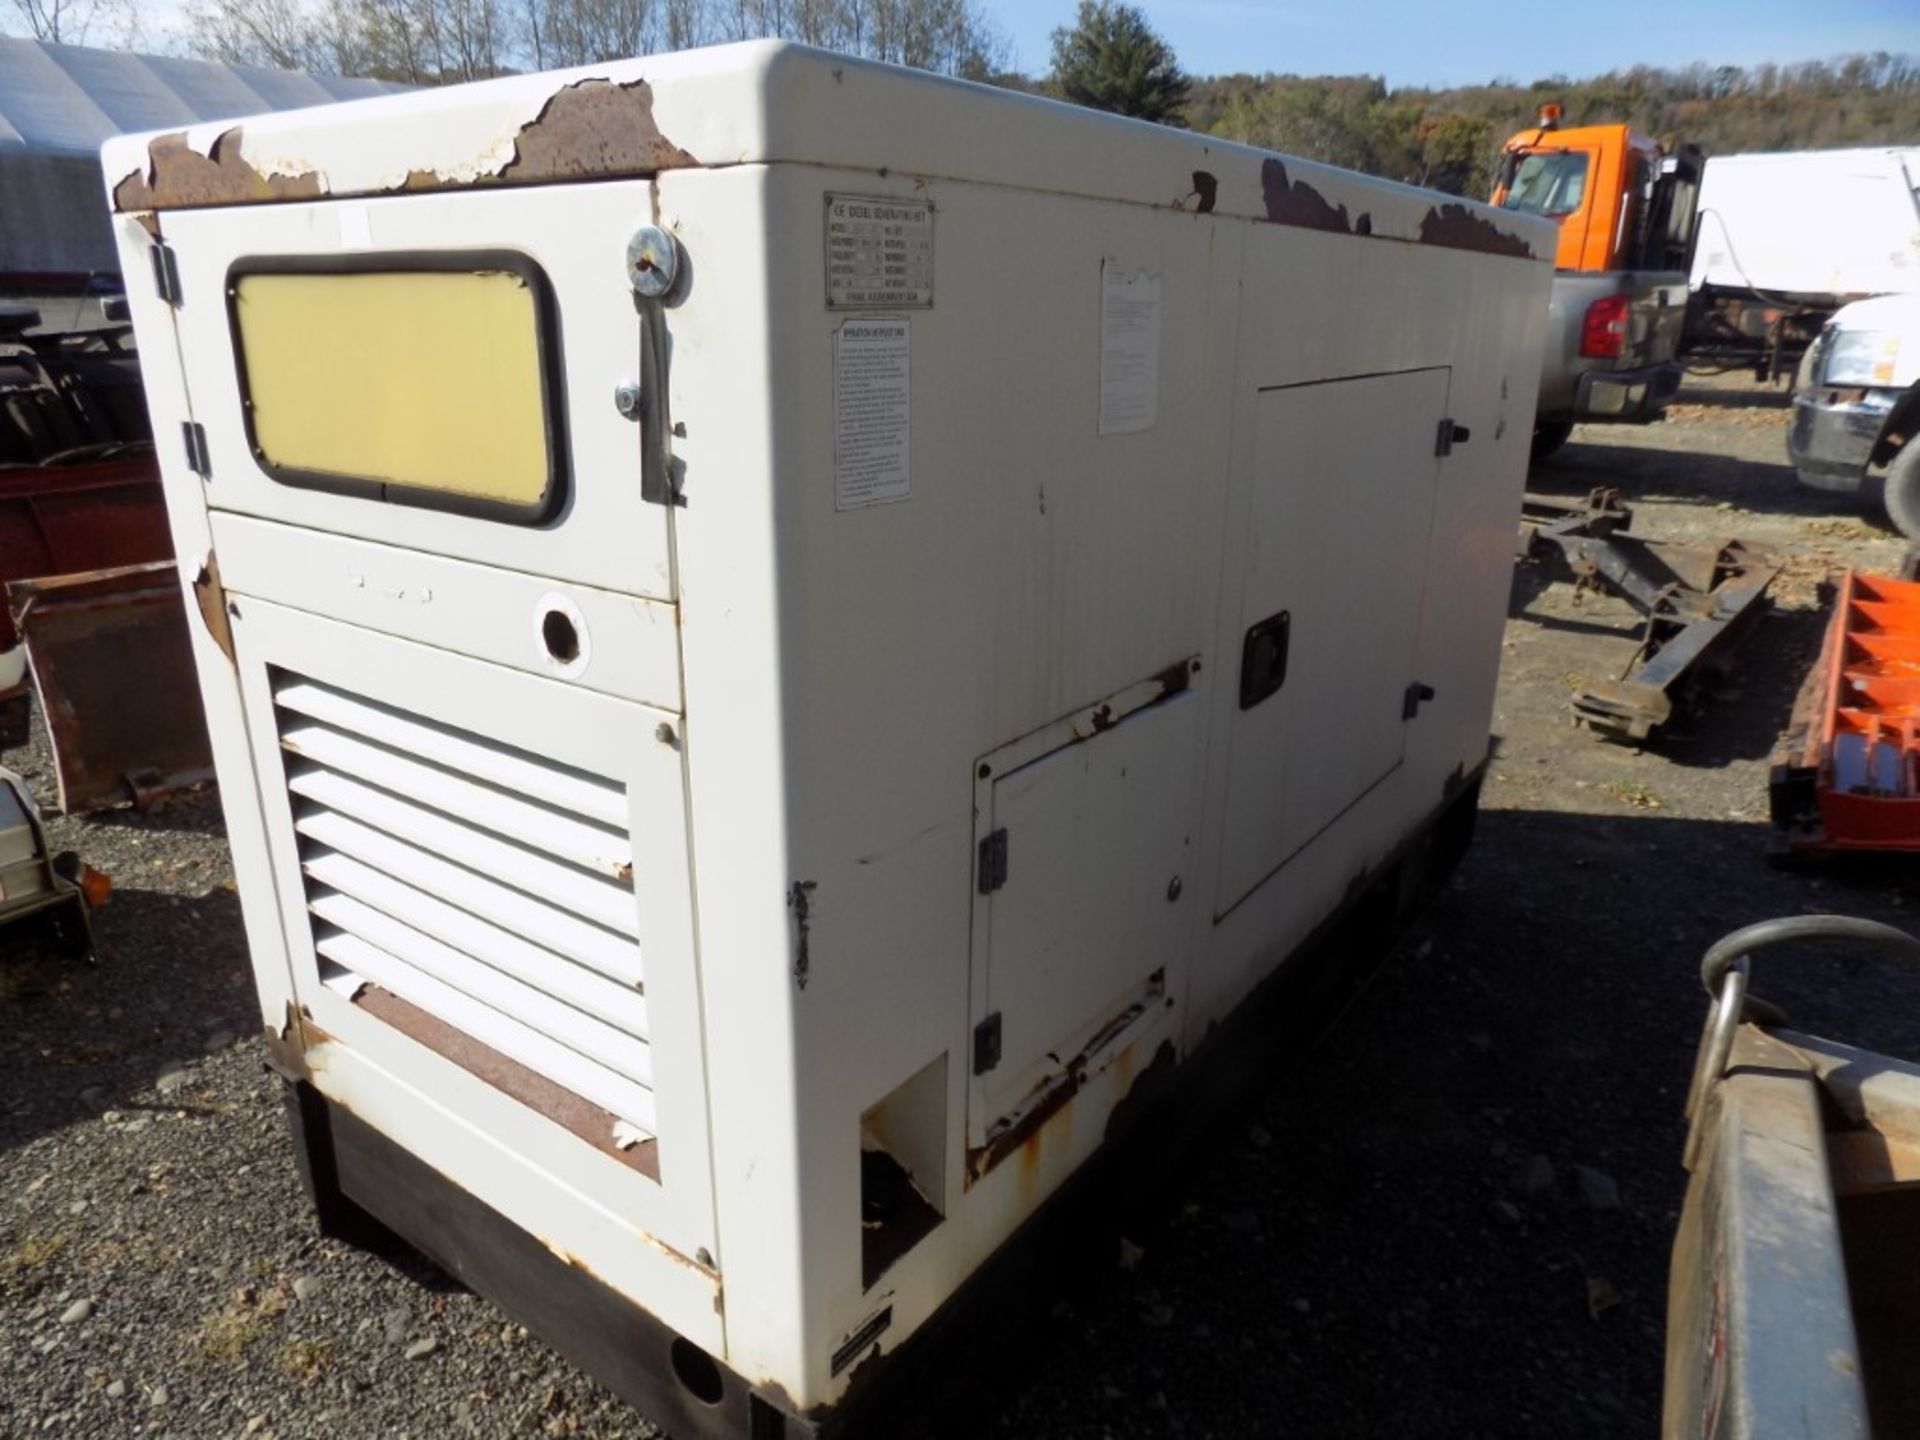 37KW Generator Set, w/4-Cyl Dsl Eng - NEEDS WORK - NOT WORKING - Image 2 of 4